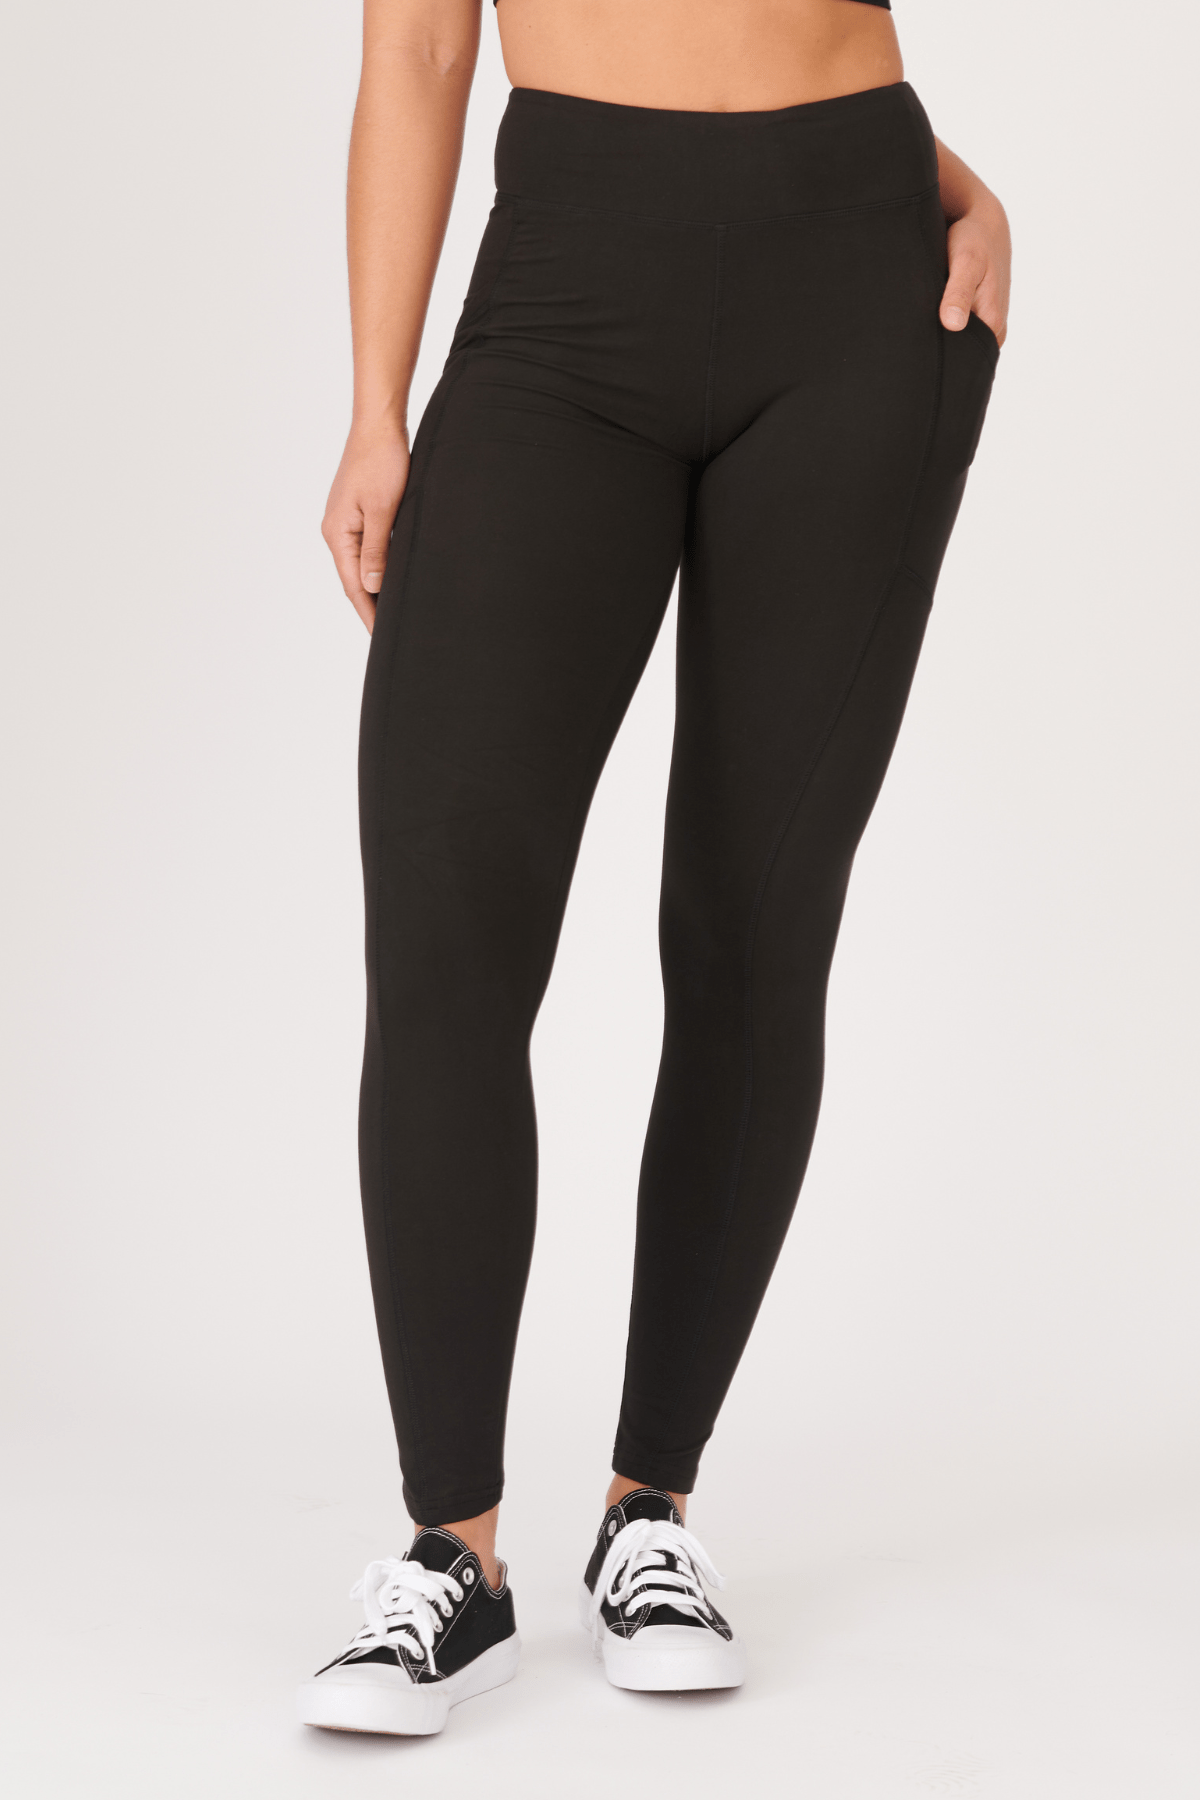 oolala Leggings Solid Black with Pockets 🦋 oolala ButterflySoft™ | Solid Black with Pockets Women's Leggings